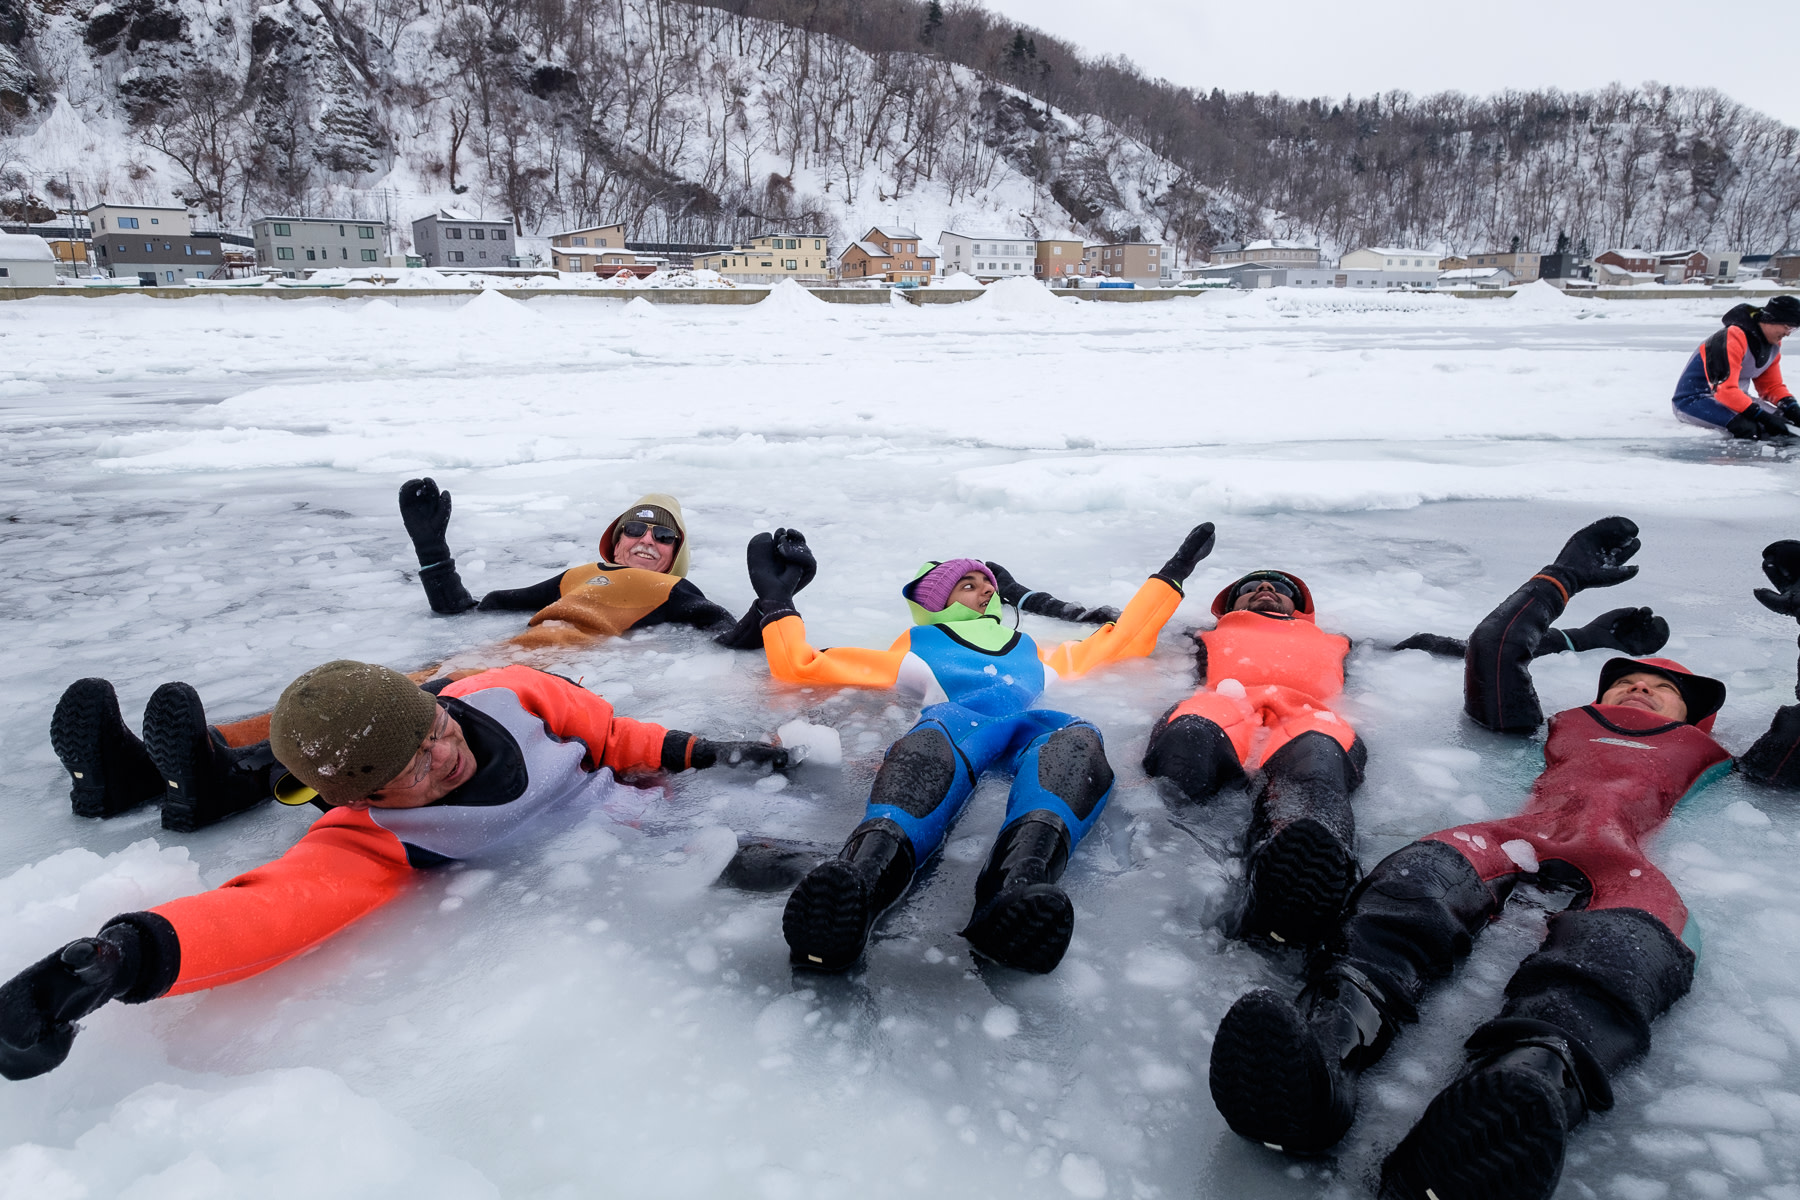 A group of travellers float in the frozen Sea of Okhotsk while wearing bright coloured dry suites